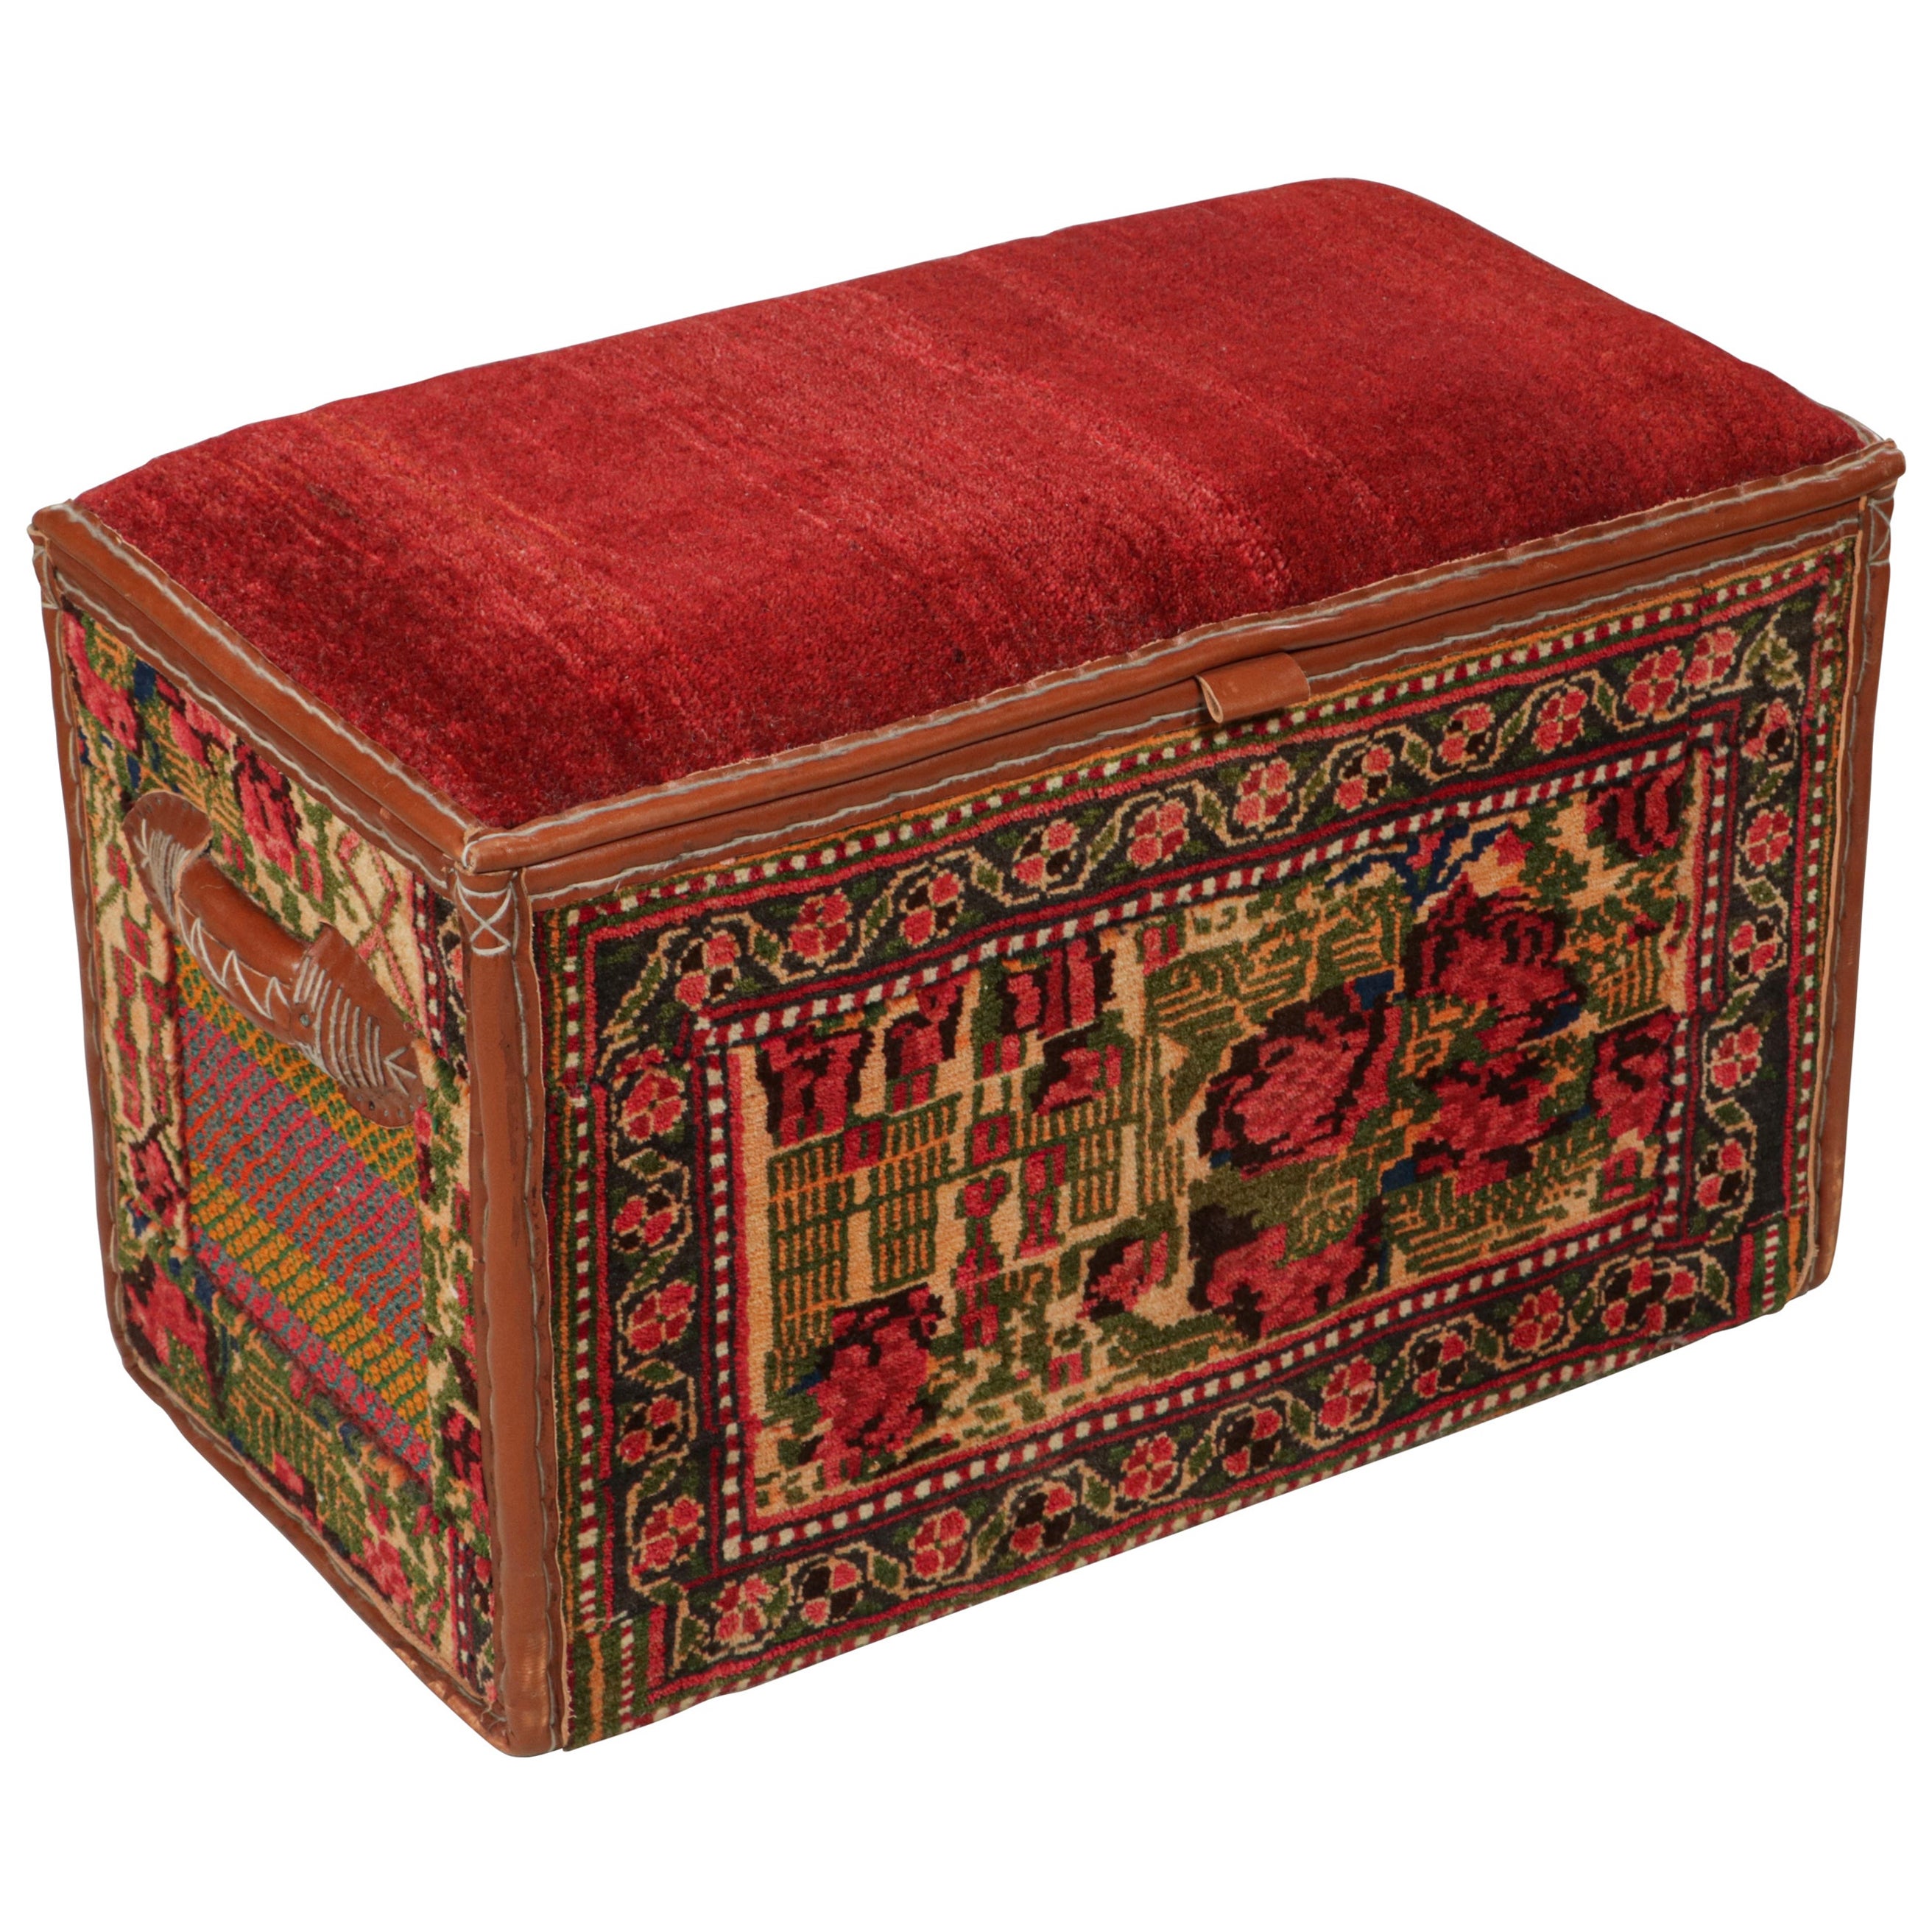 Rug & Kilim’s Persian Tribal Storage Chest with Colorful Geometric Patterns